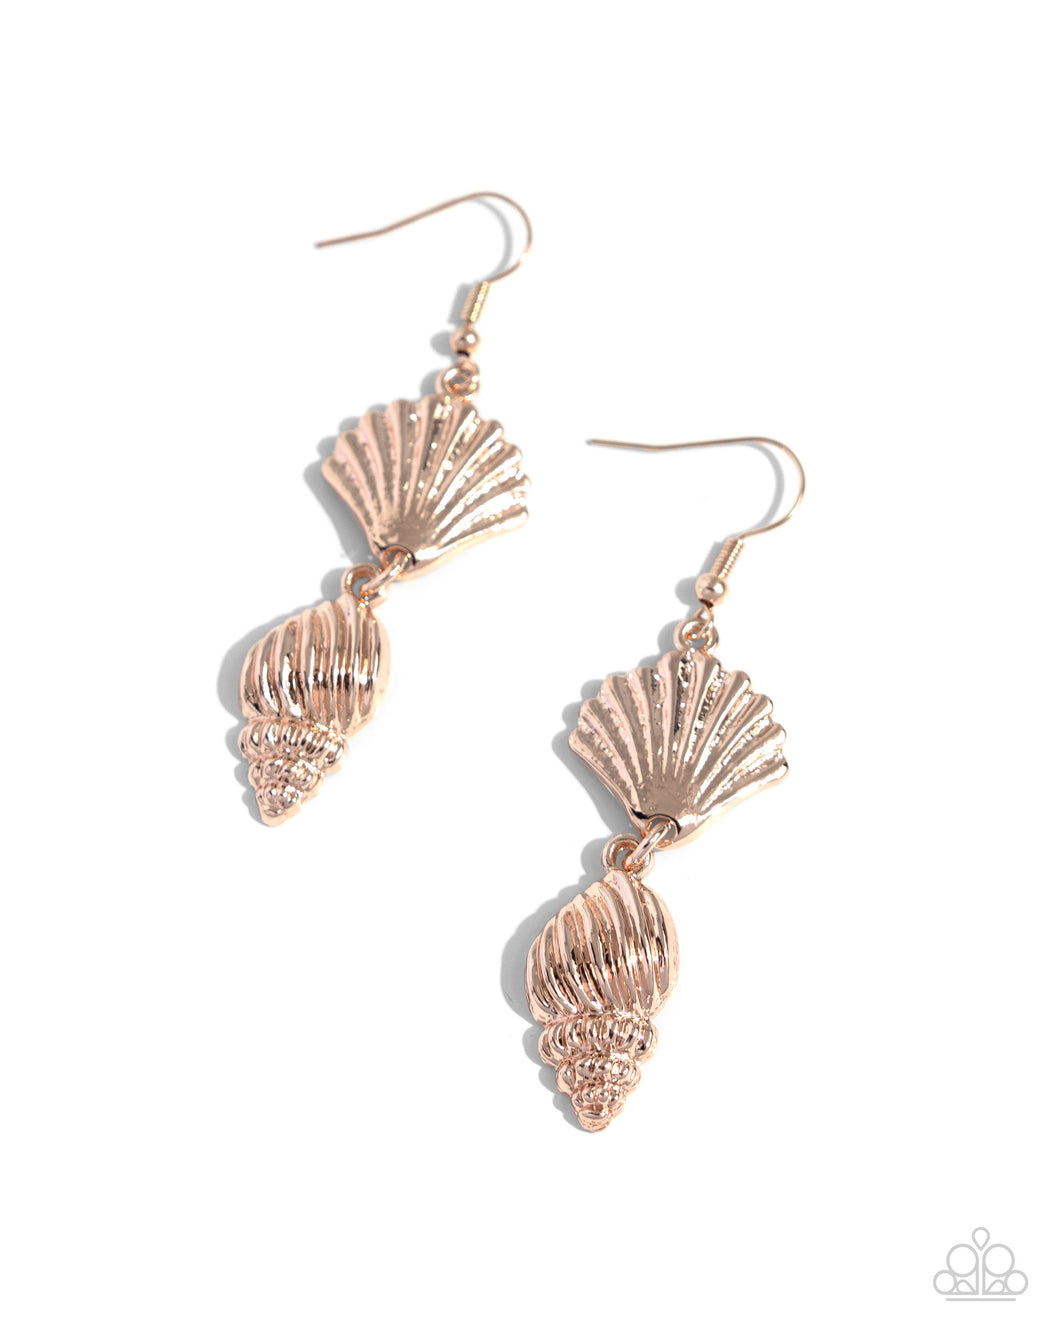 Paparazzi Earrings SHELL, I Was In the Area - Rose Gold Coming Soon